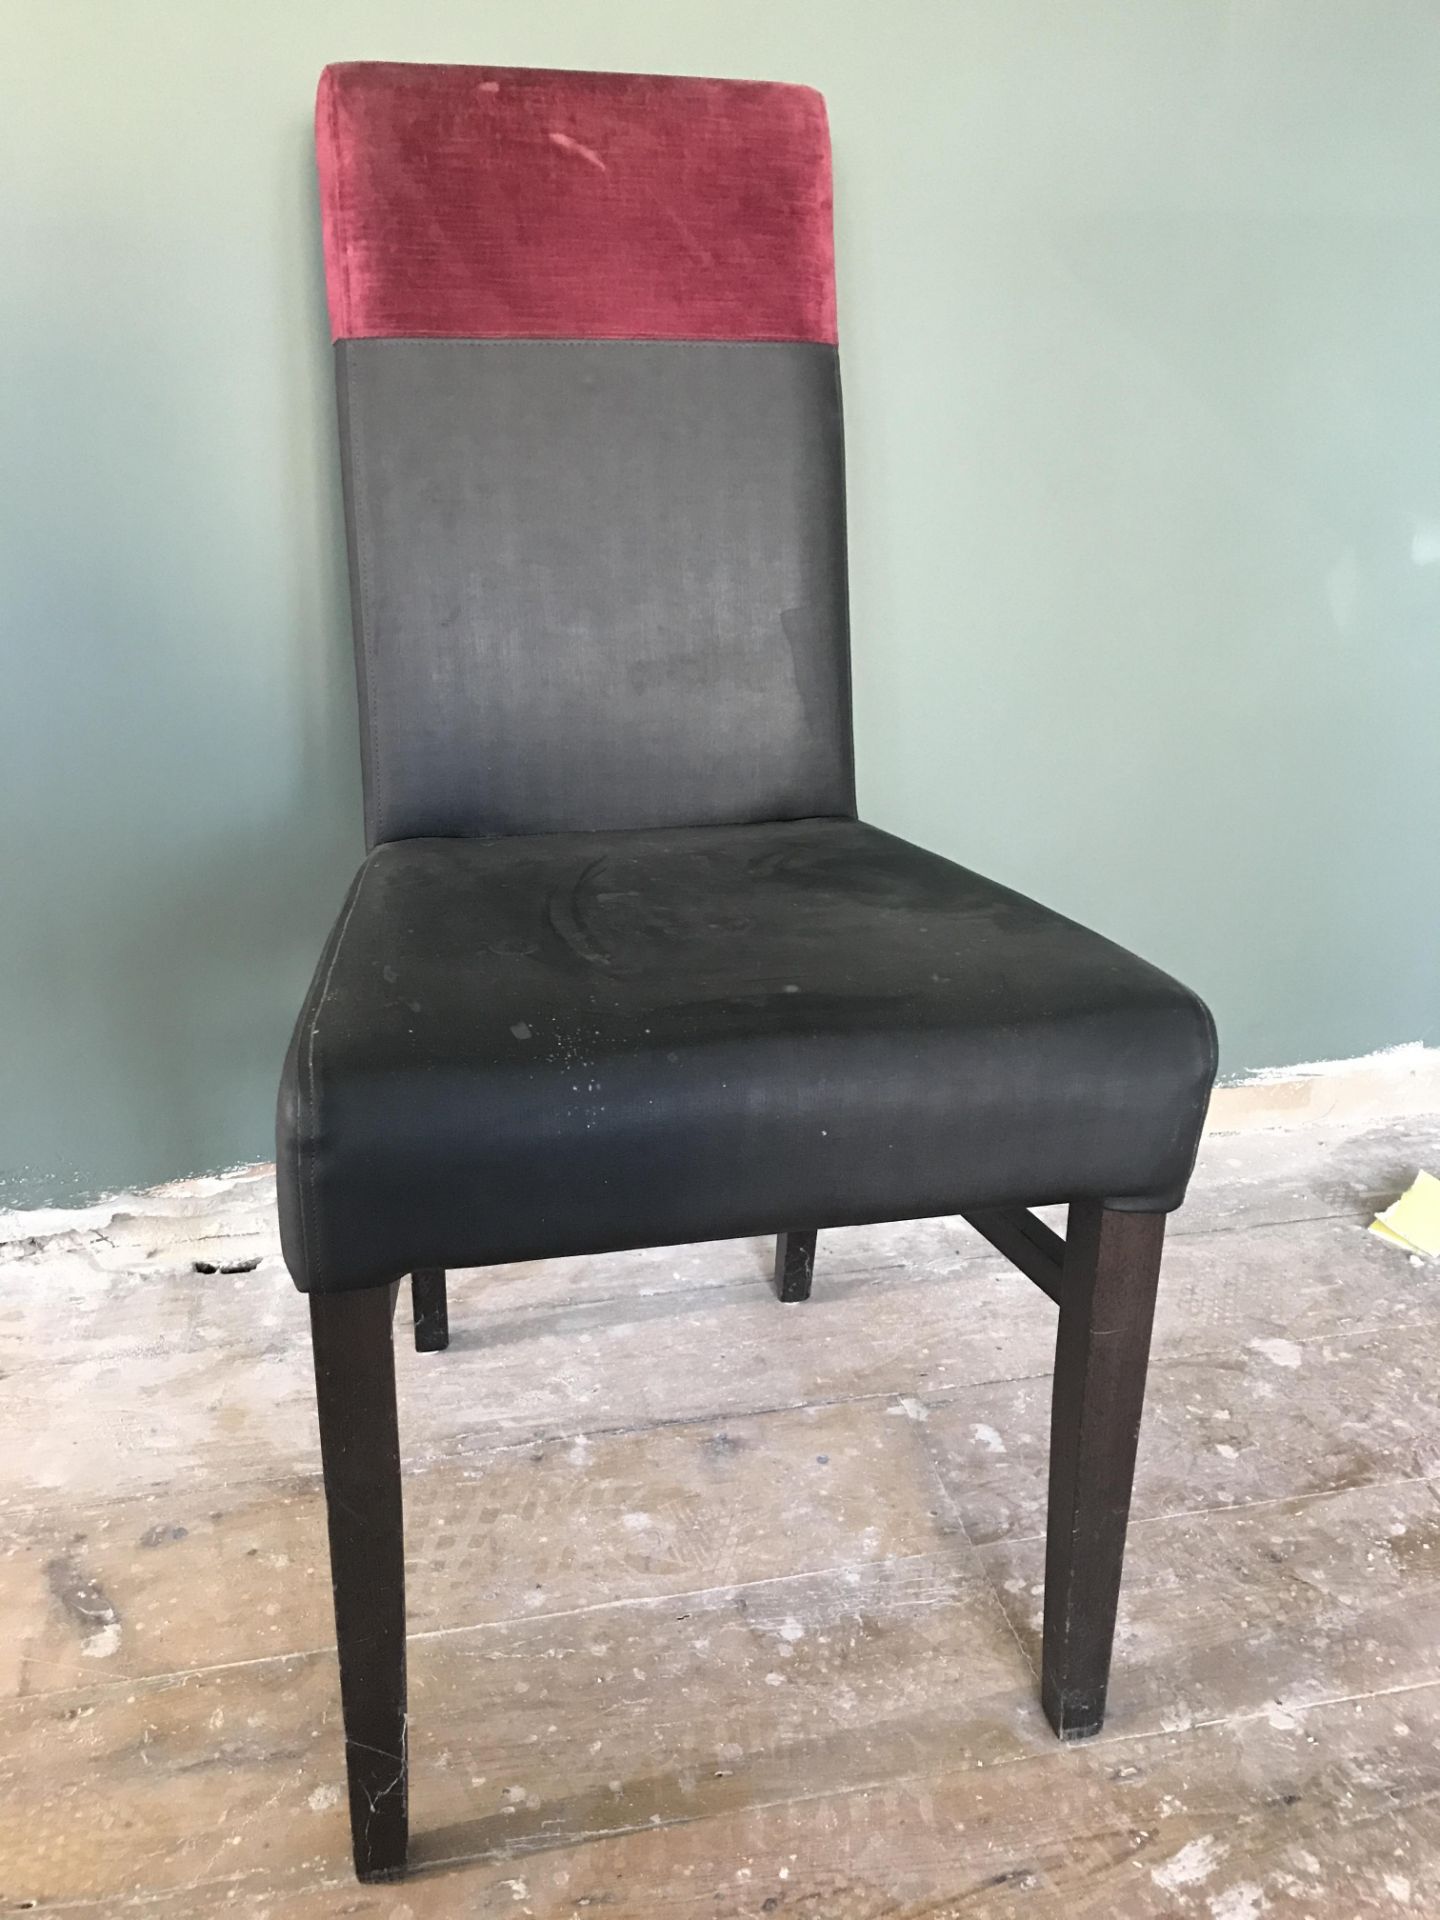 10 x Black Faux Leather Dining Chairs With Red Velour Top